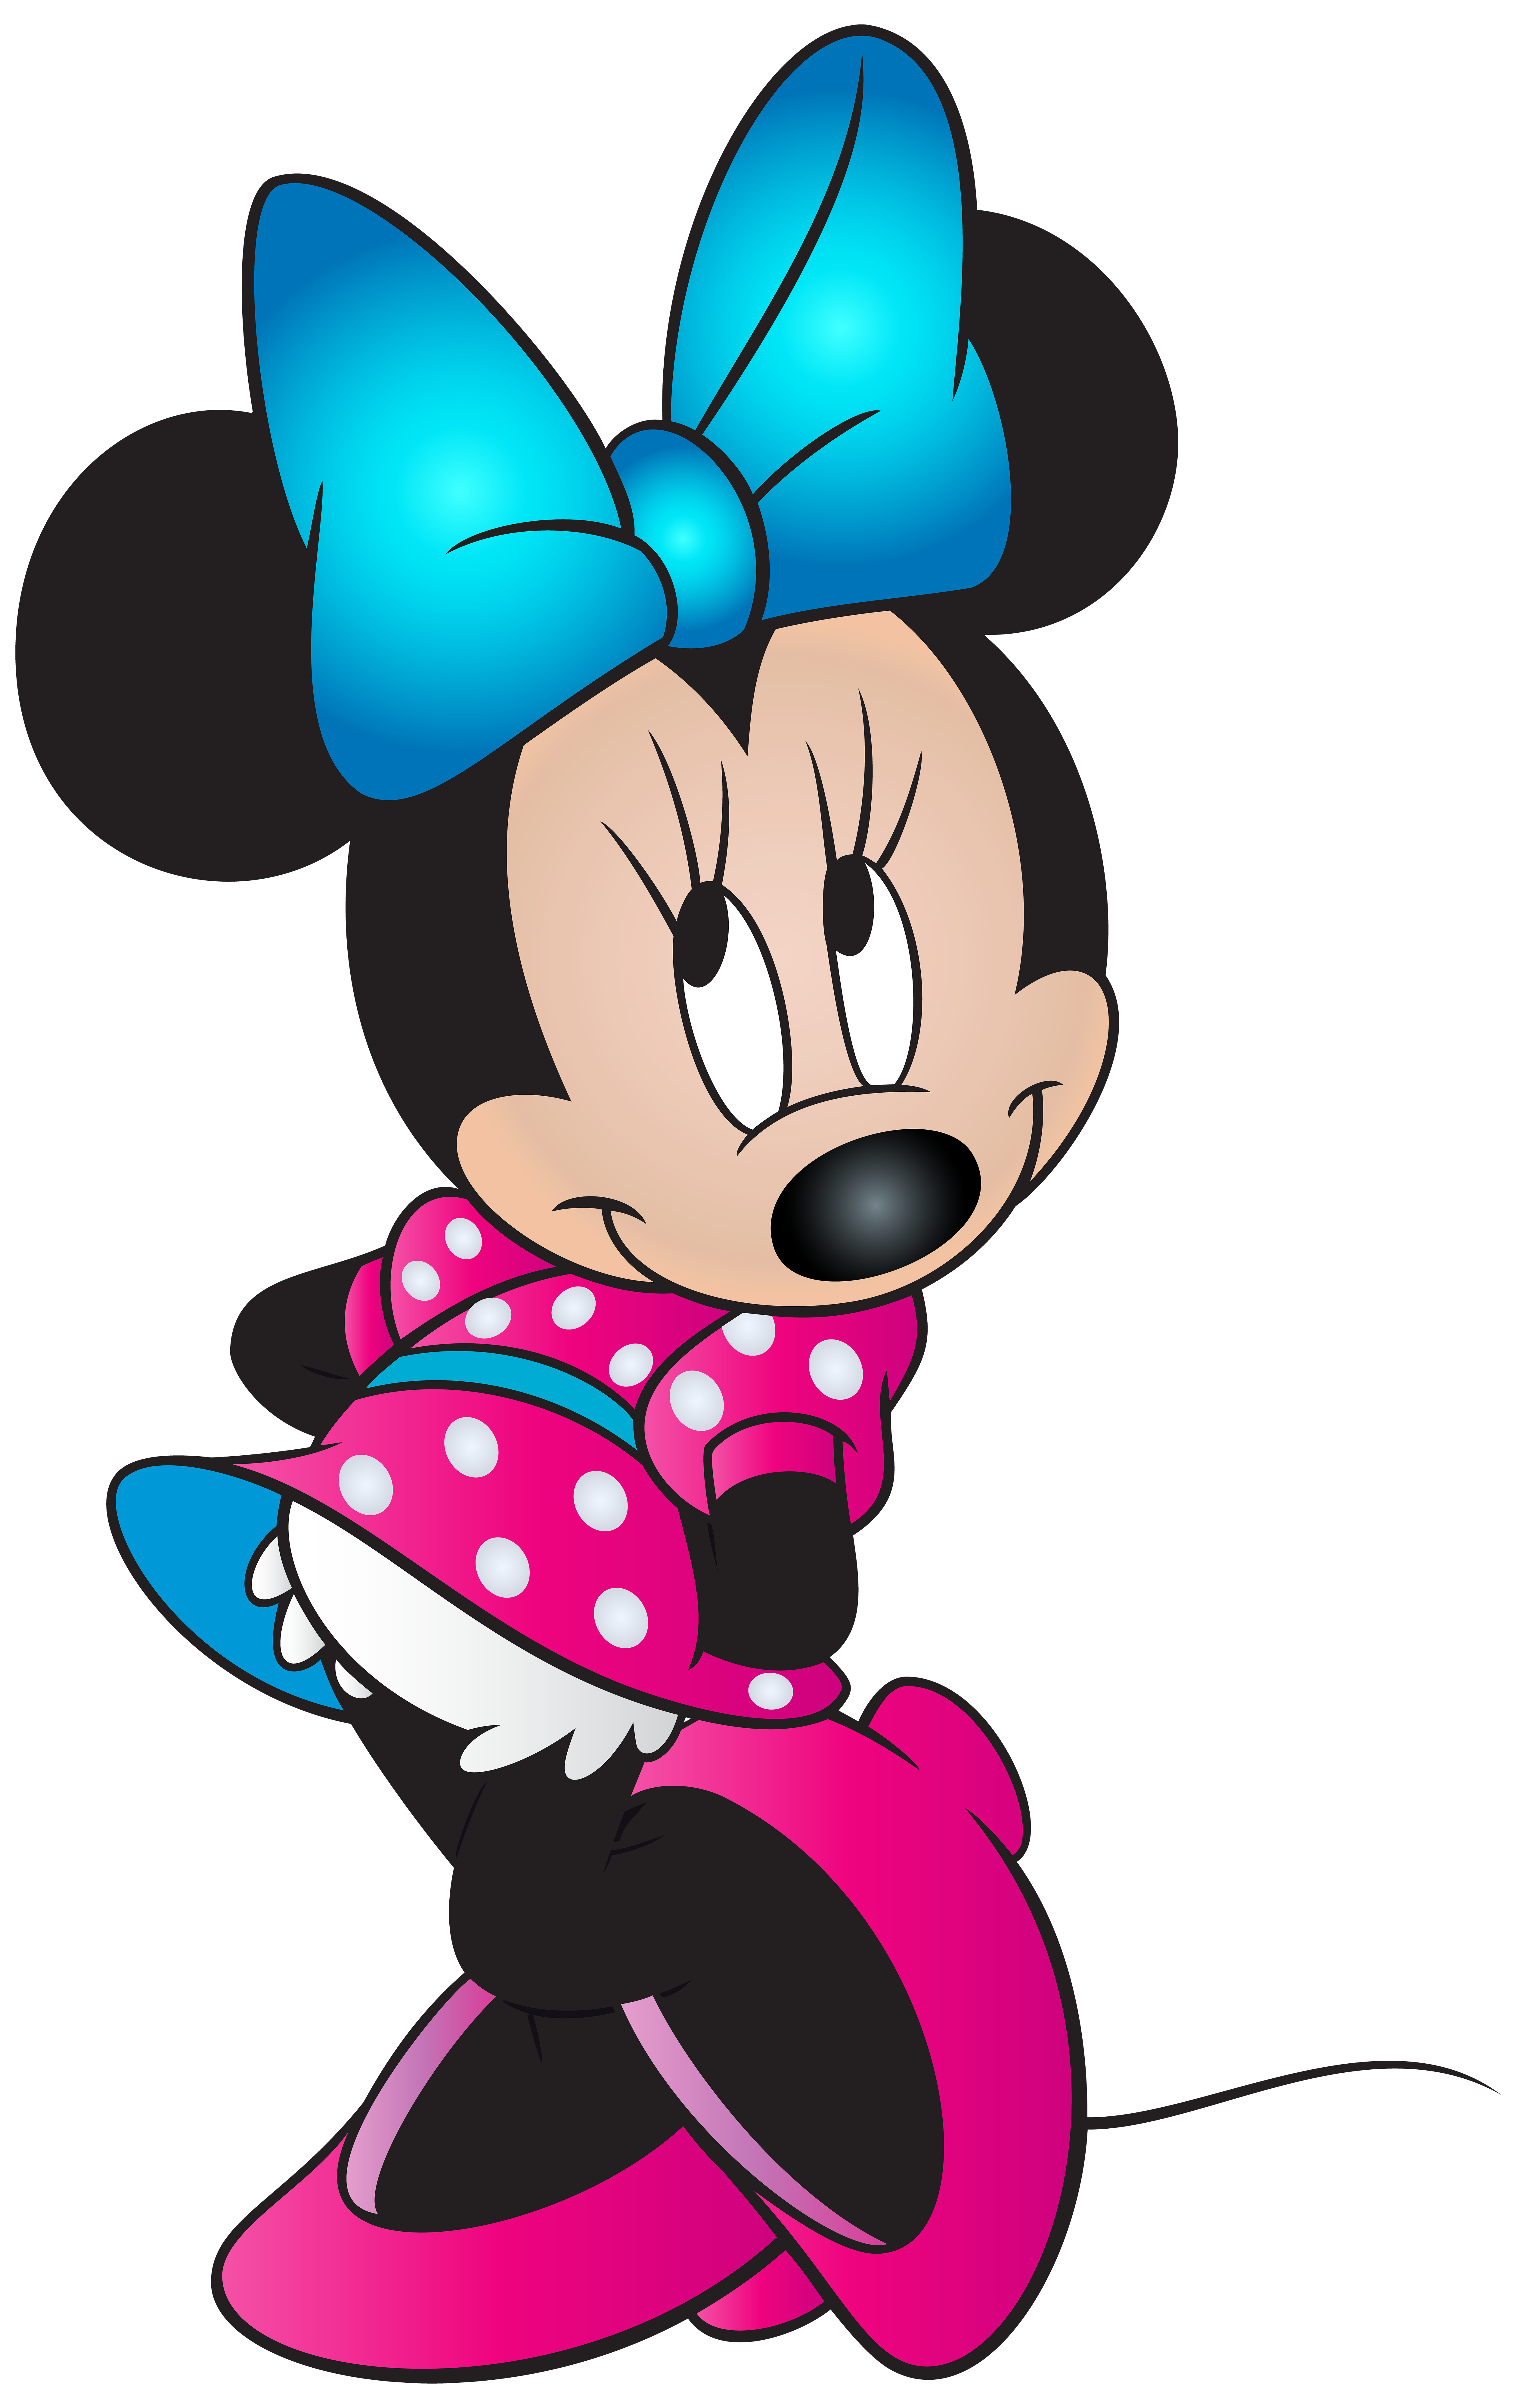 Free png transparent image. Hand clipart minnie mouse